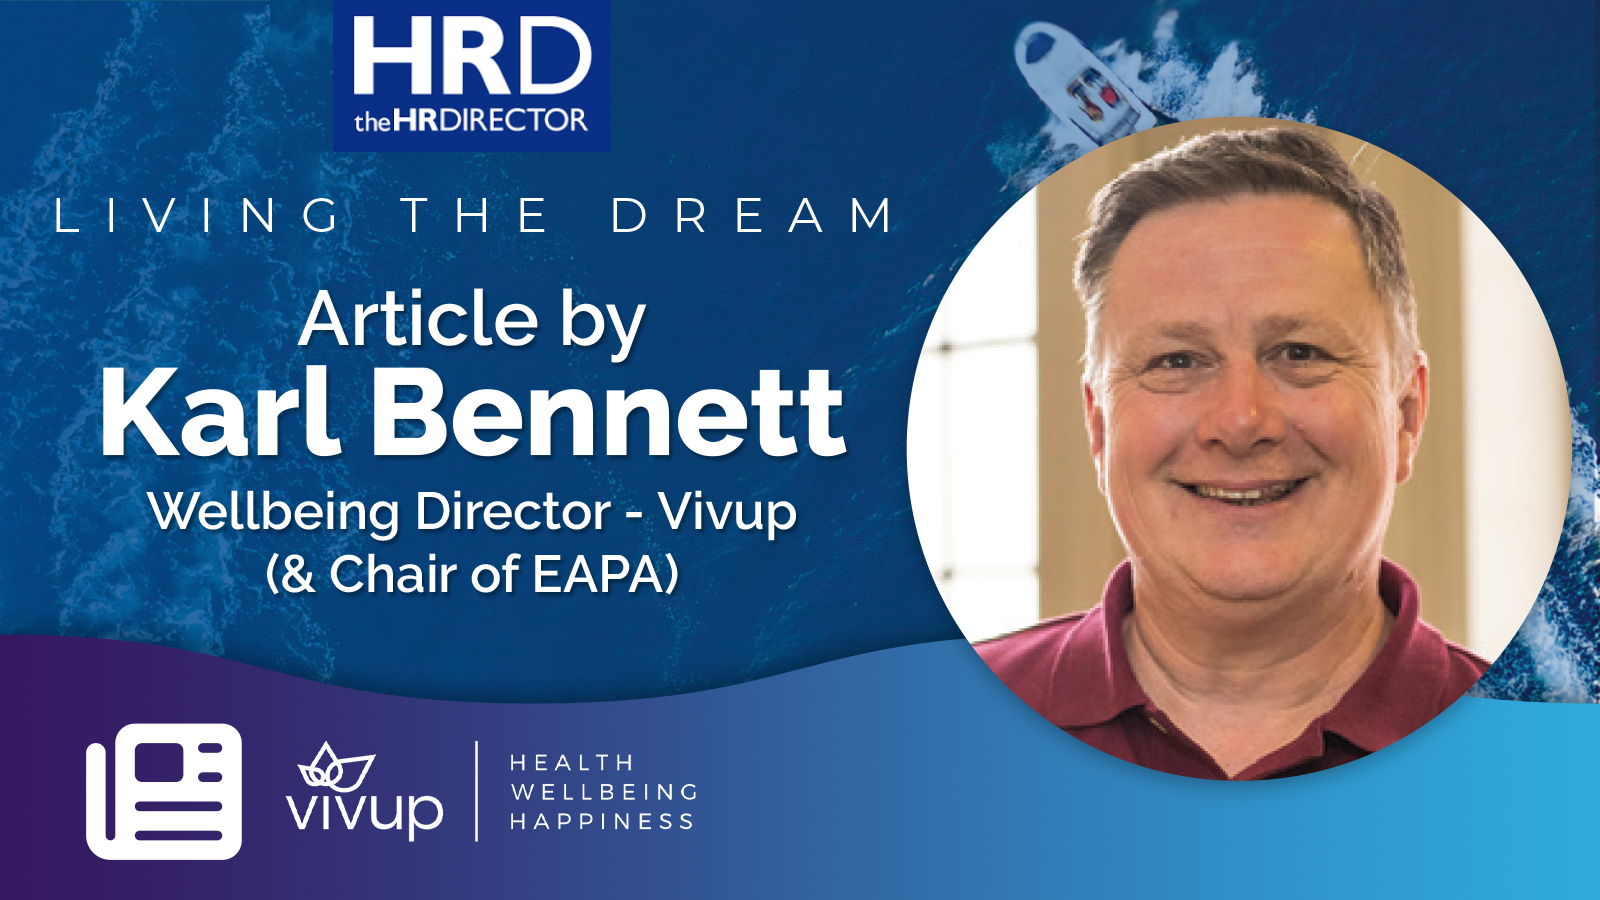 HR Director wellbeing blog article image with Vivup wellbeing director Karl Bennett